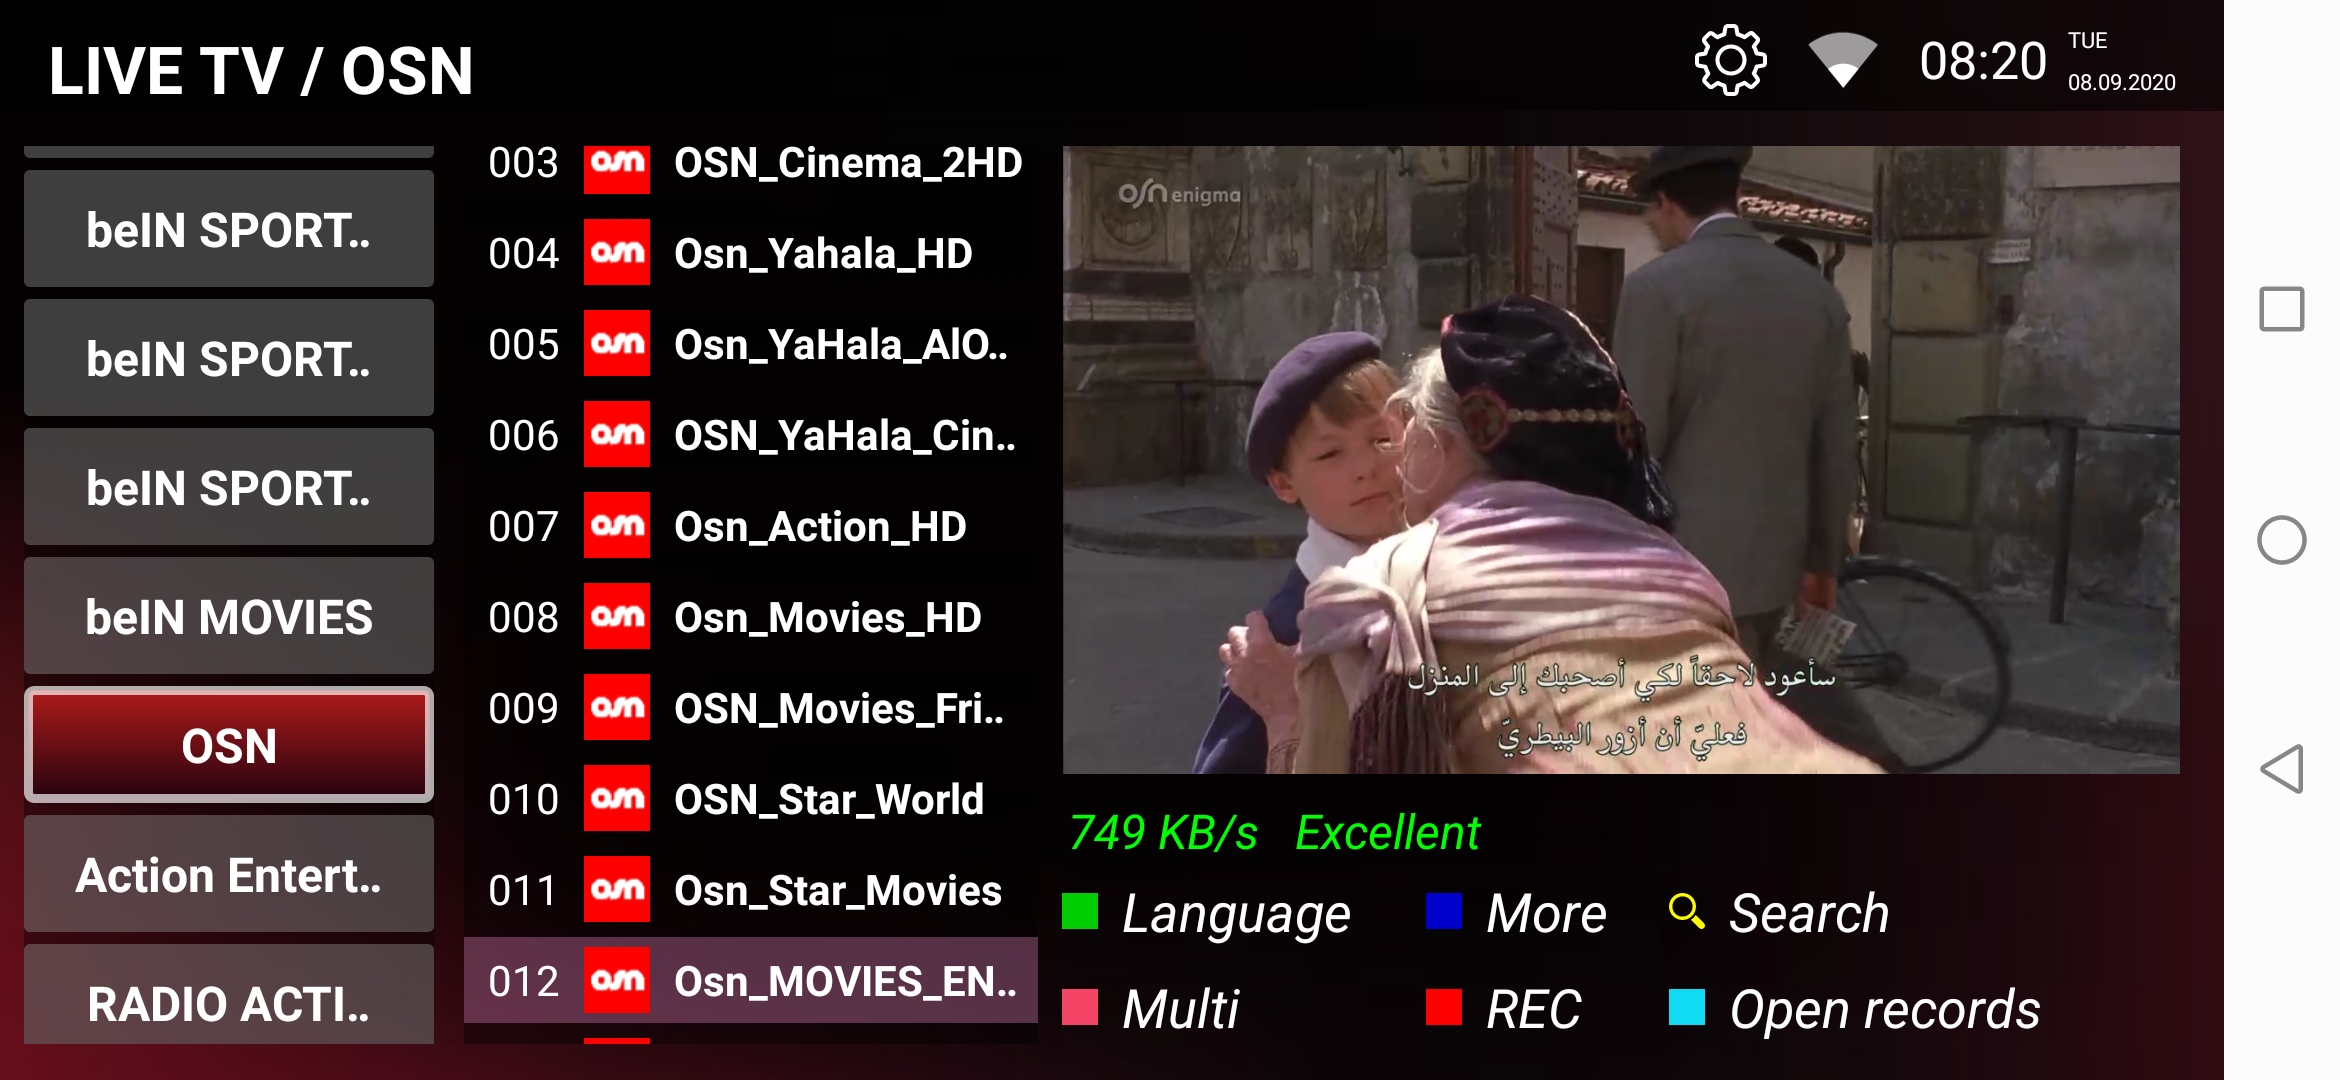 ACTION IPTV APK WITH 6 MONTHS FREE ACCOUNT | ENJOY ALL PREMIUM PAID CHANNELS FREE